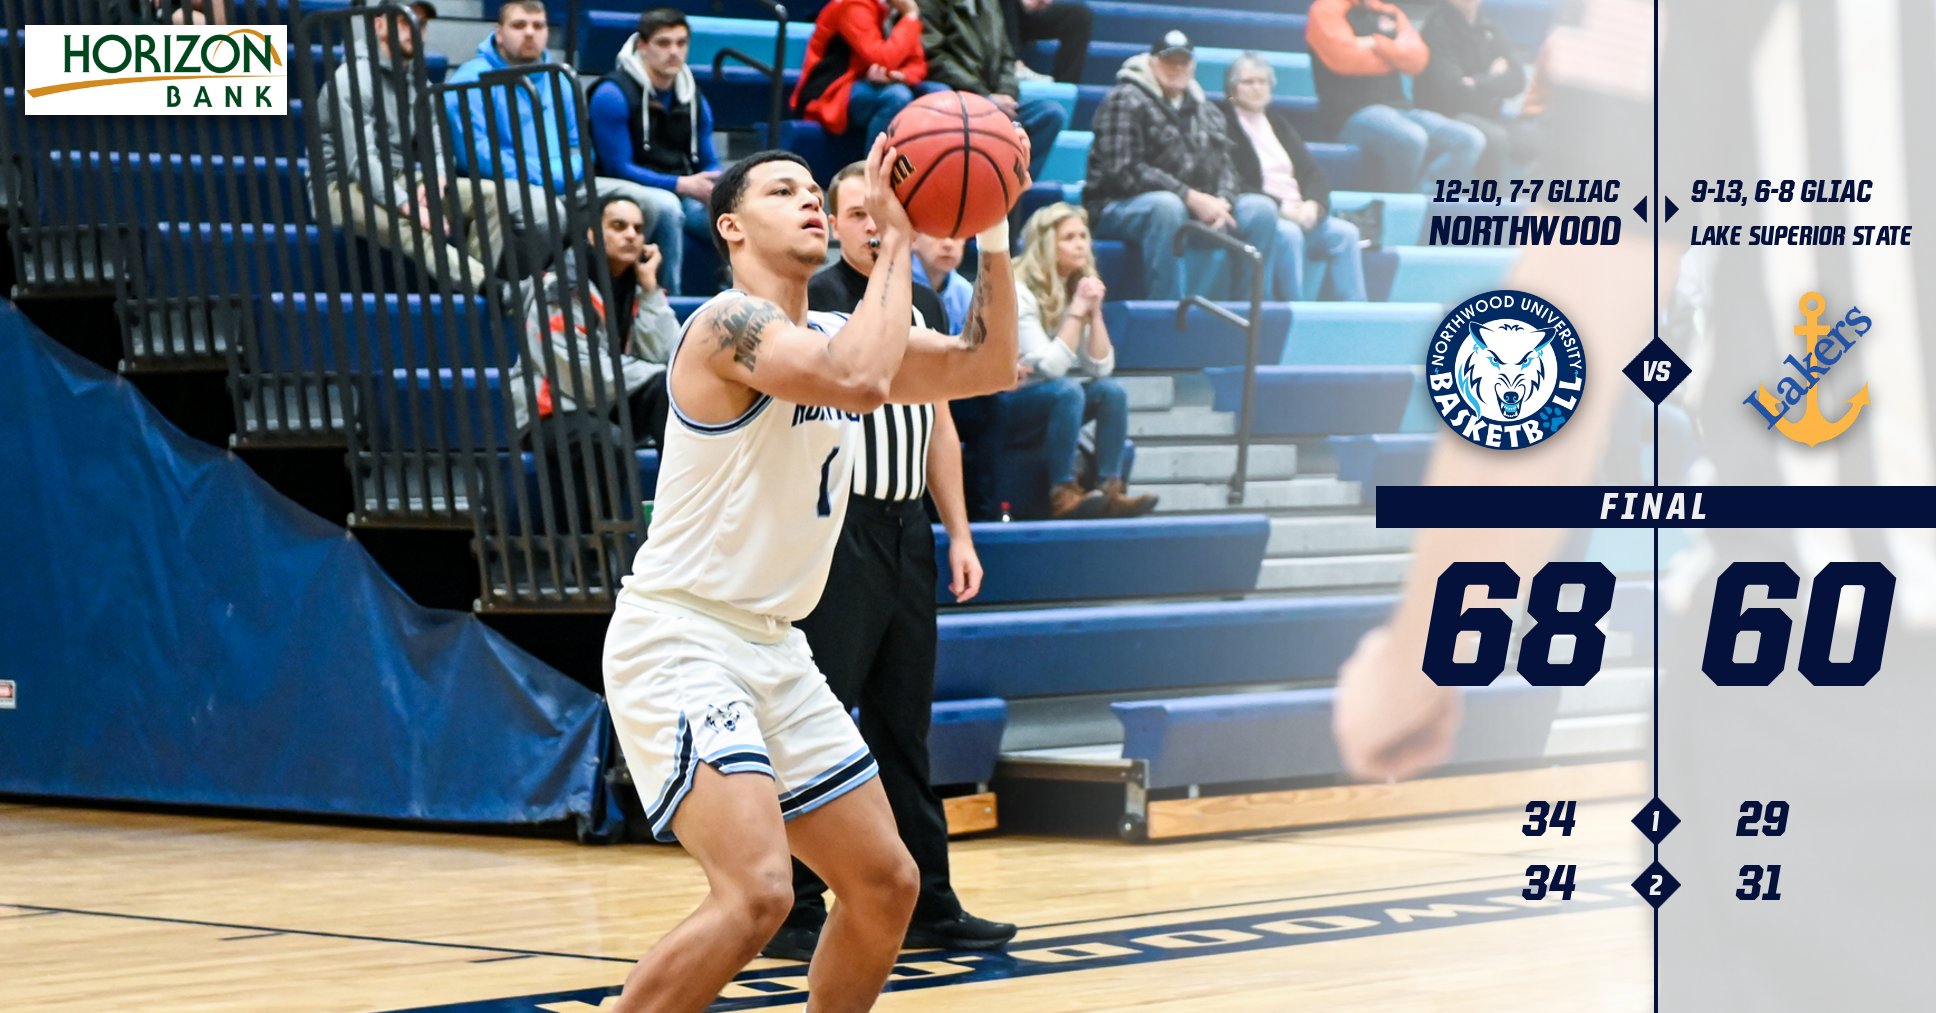 Men's Basketball Extends Win Streak To Four With 68-60 Victory At Lake Superior State